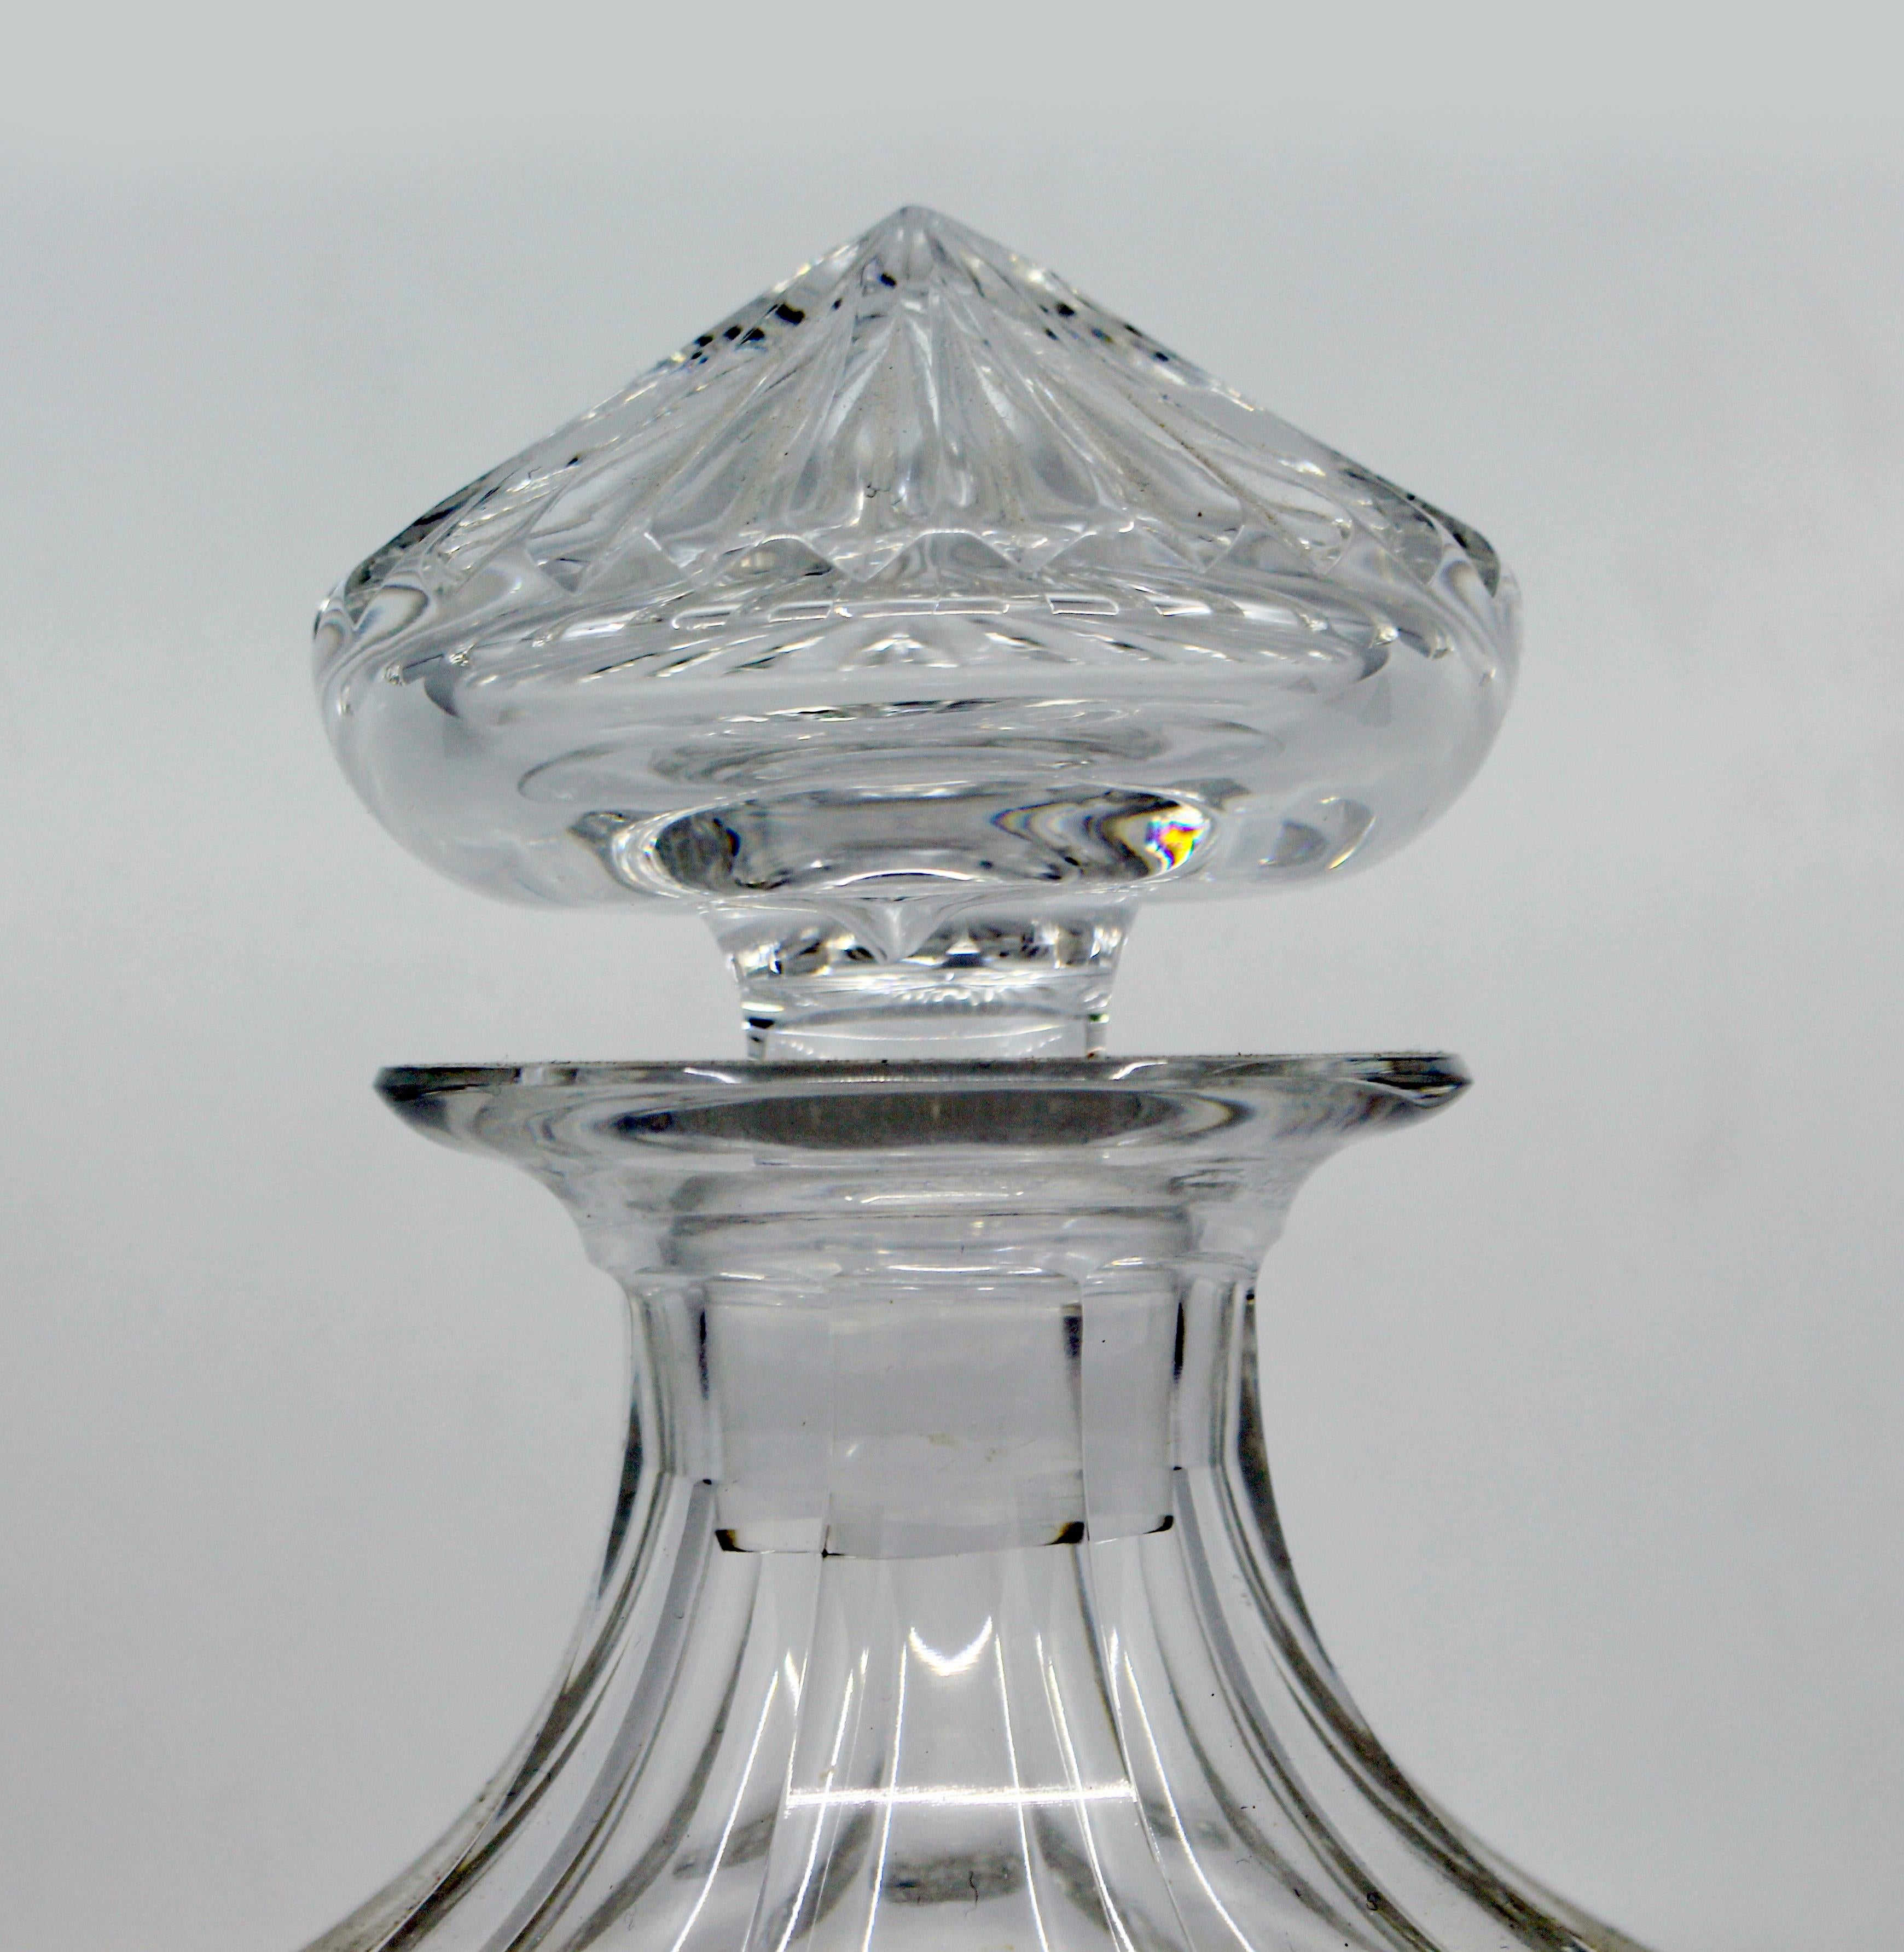 Origin 
Vintage, 20th century, Royal Brierley, Stourbridge, England

Measures: Width 
13 cm / 5 in

Height 
21 cm / 8 1/4 in

Glass 
Cut glass

Condition 
Very good condition. Minor light wear commensurate with age
 
 

Cut glass